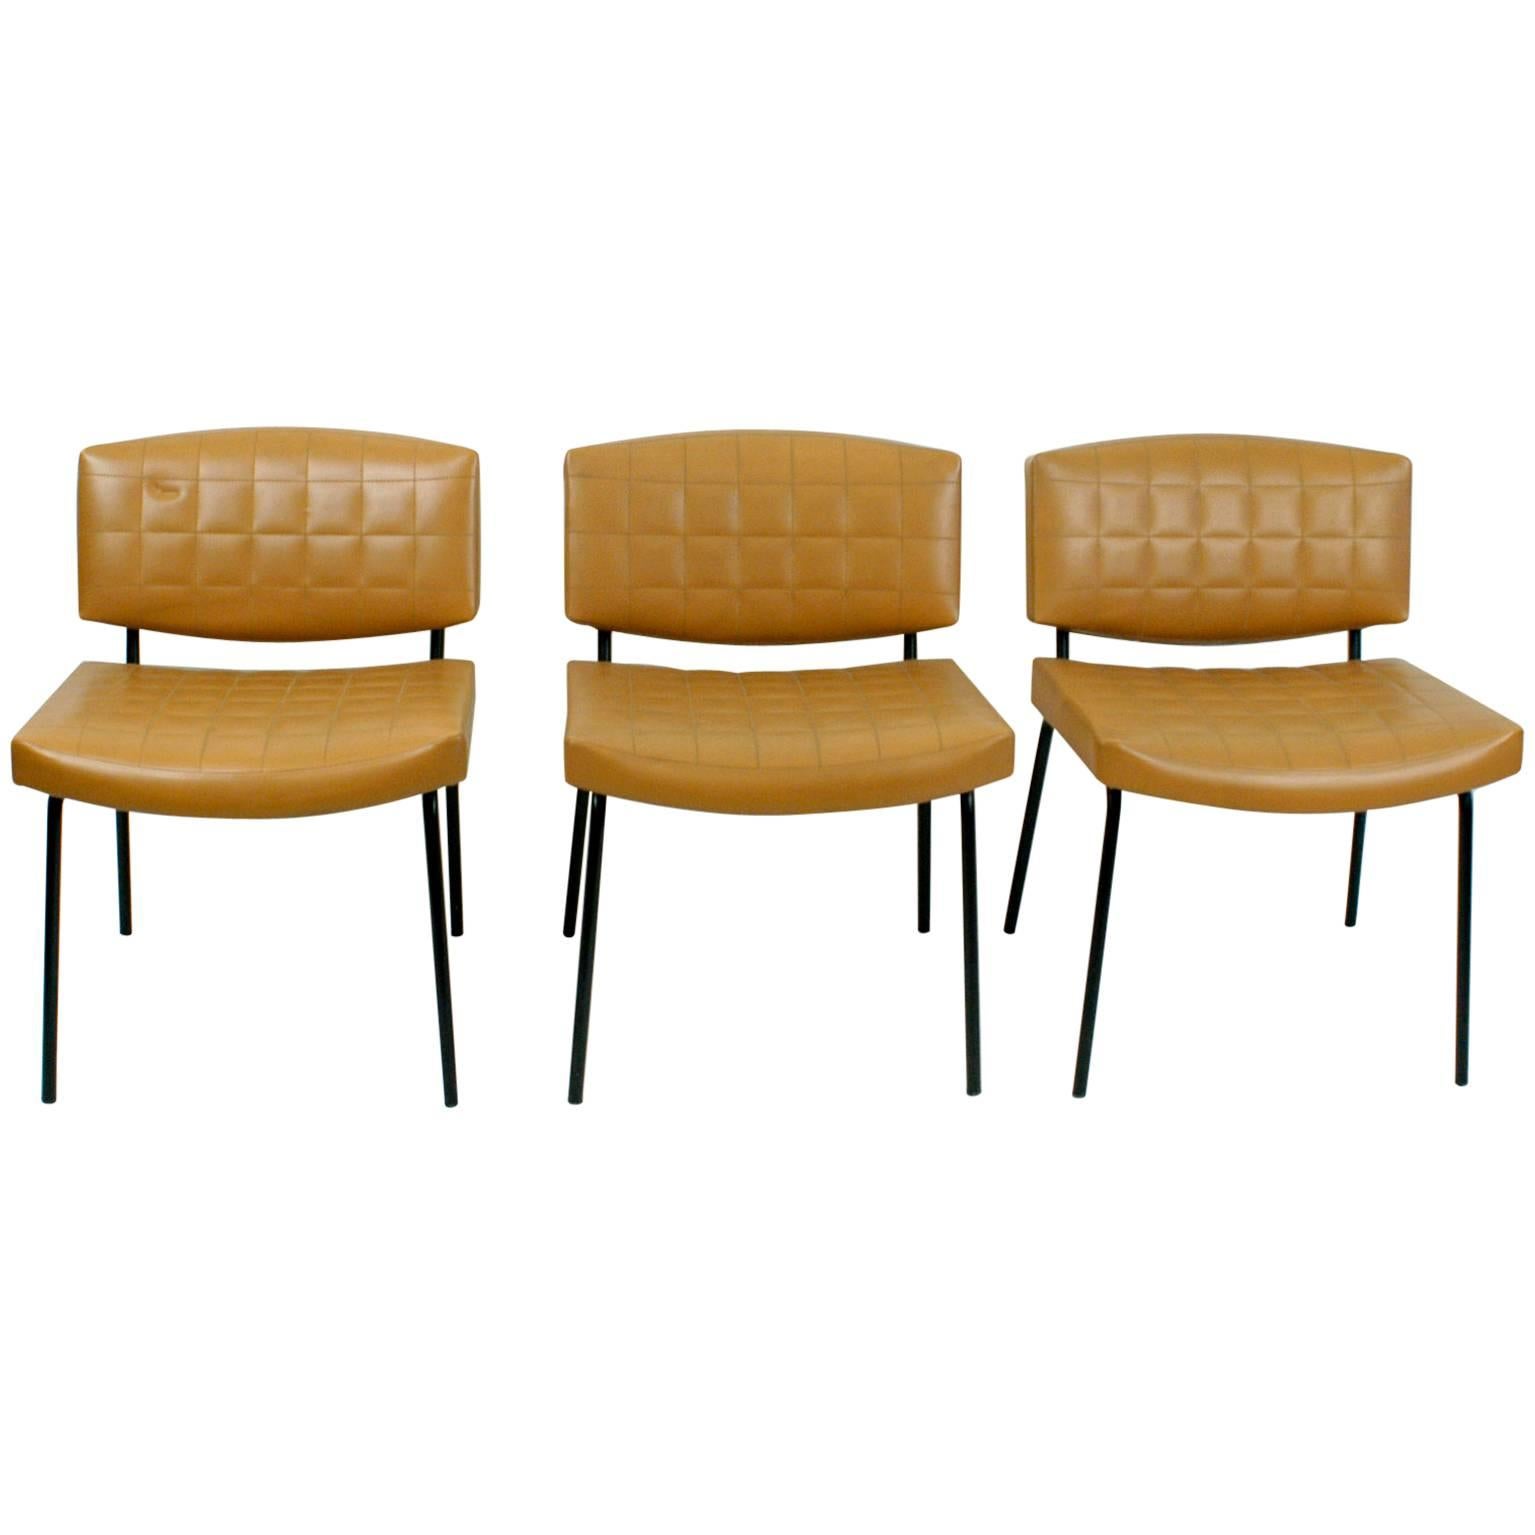 Set of Three Cognac Midcentury Chairs Designed by Pierre Guariche for Meurop